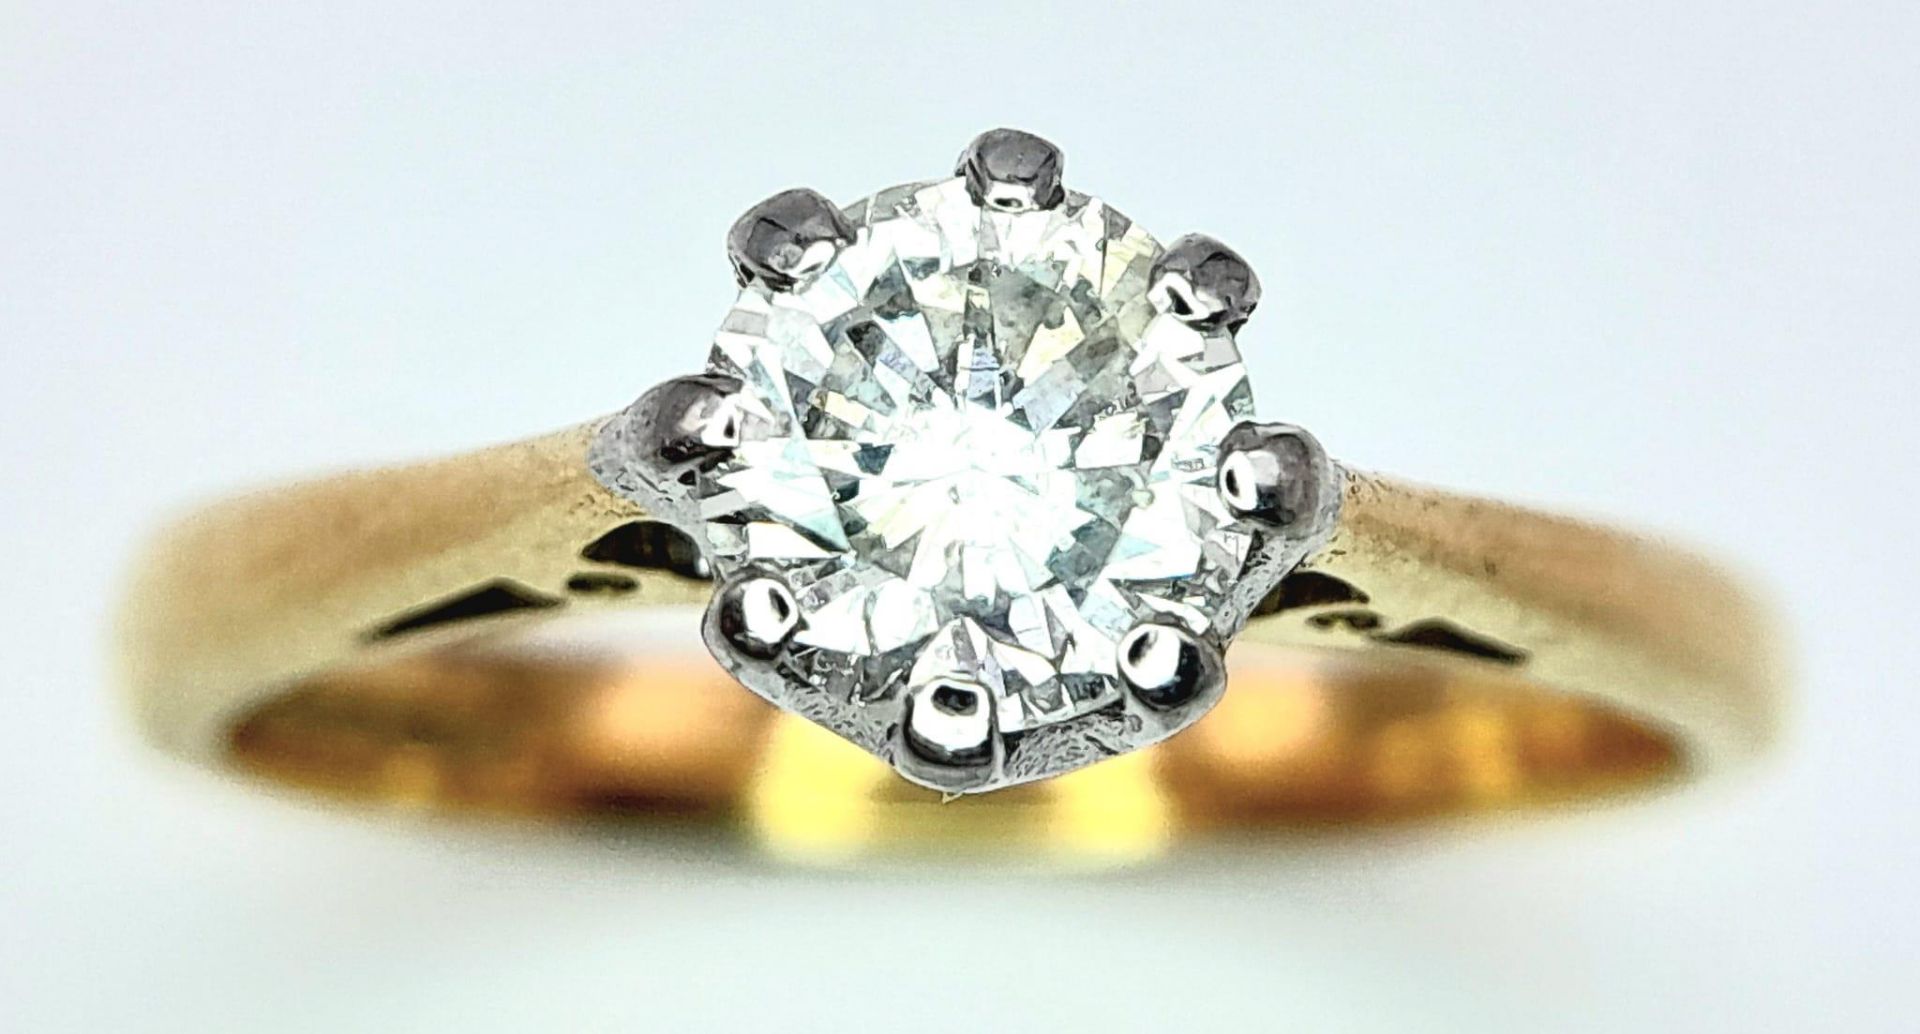 AN 18K YELLOW GOLD DIAMOND SOLITAIRE RING - 0.65CT. 8 CLAW SETTING. 3.4G. SIZE L.